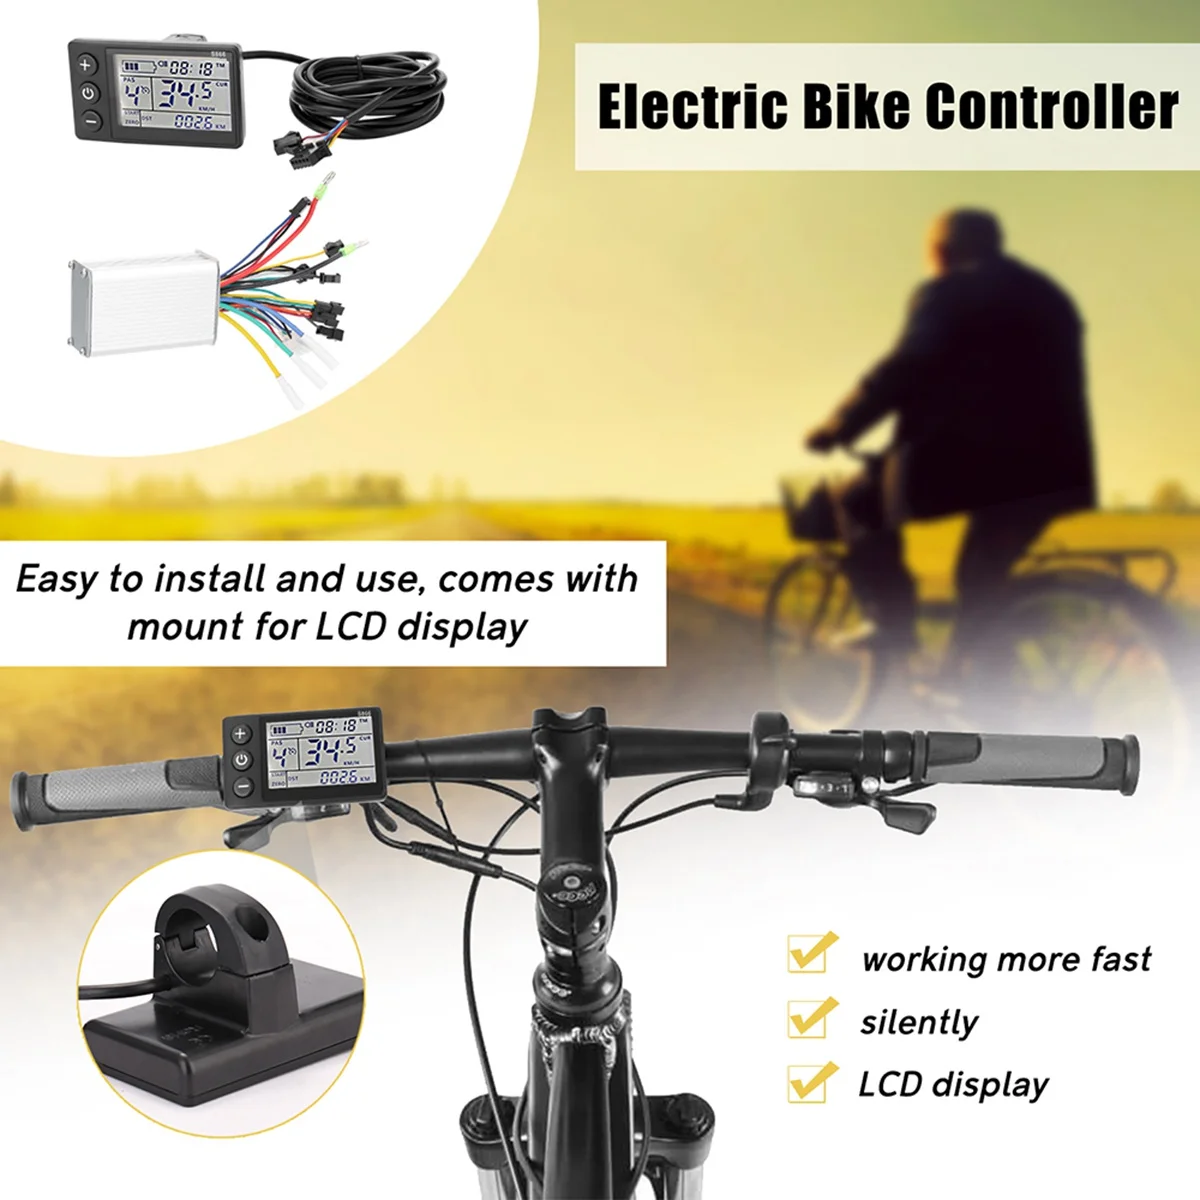 

Electric Bike Controller 24V-48V 250W-350W Brushless E-Bike Controller with LCD Display Bicycles Scooter Controller S866